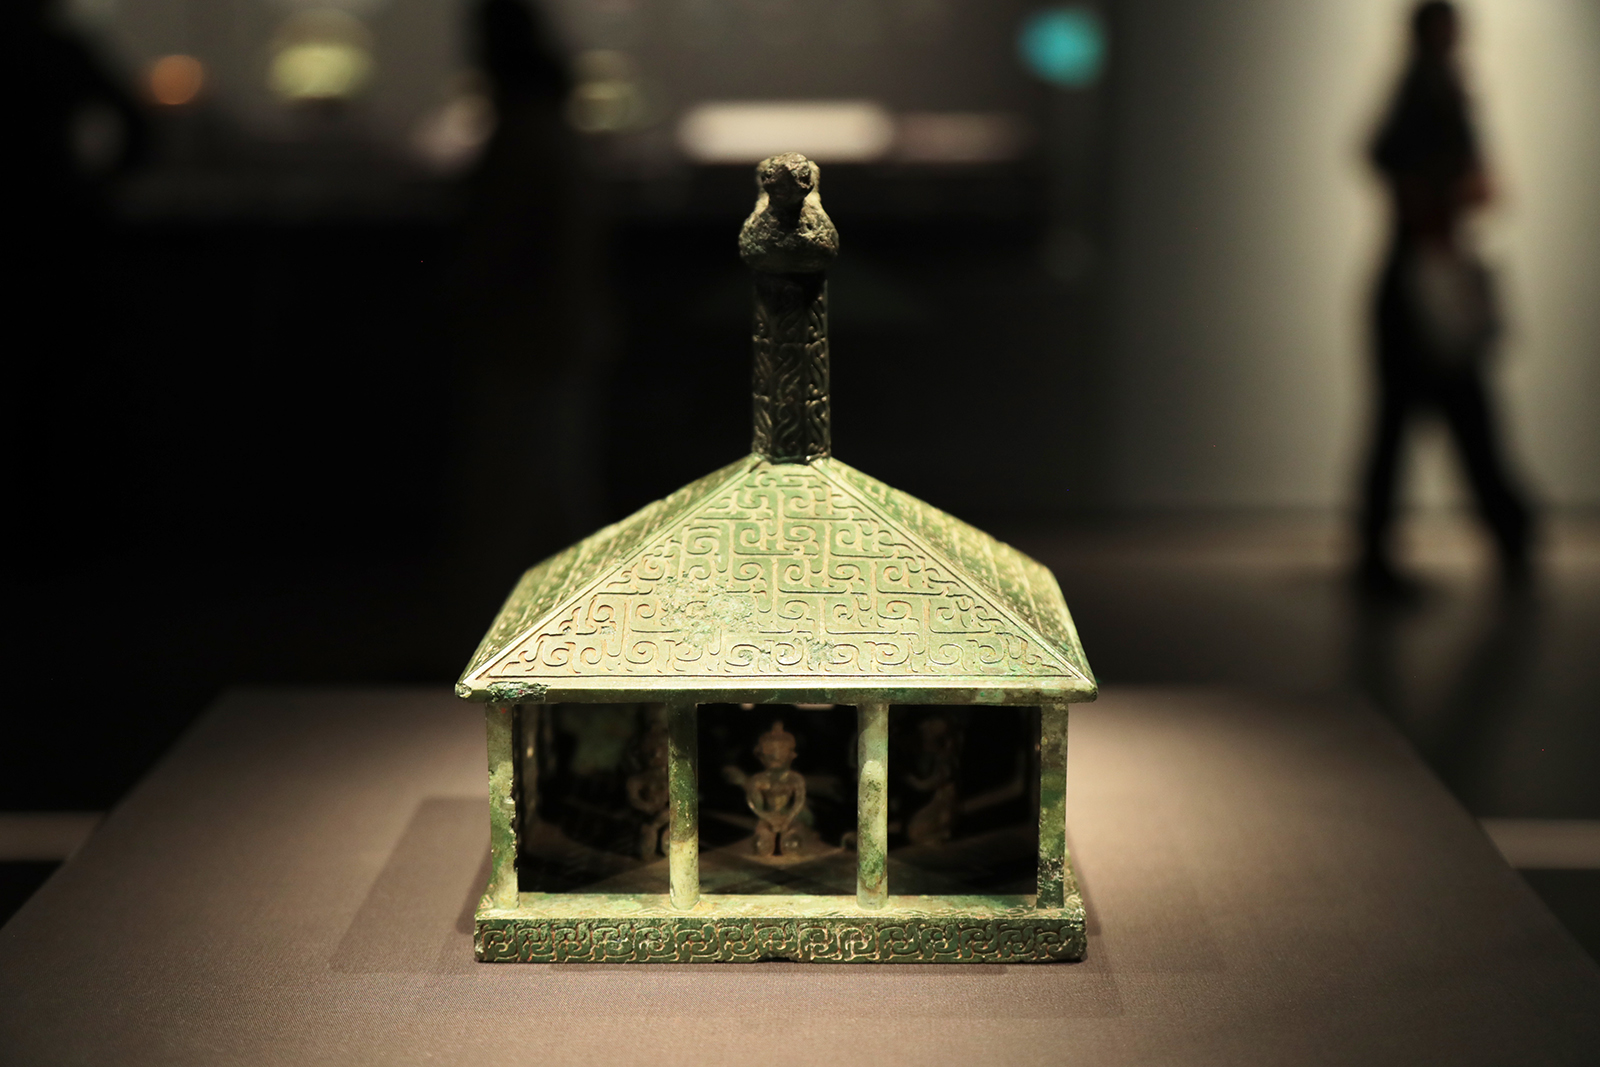 A bronze house model with figurines of dancers and musicians dating to the Spring and Autumn period (770-476BC) is on display in the Zhijiang Branch of the Zhejiang Provincial Museum in Hangzhou, Zhejiang Province. /CGTN